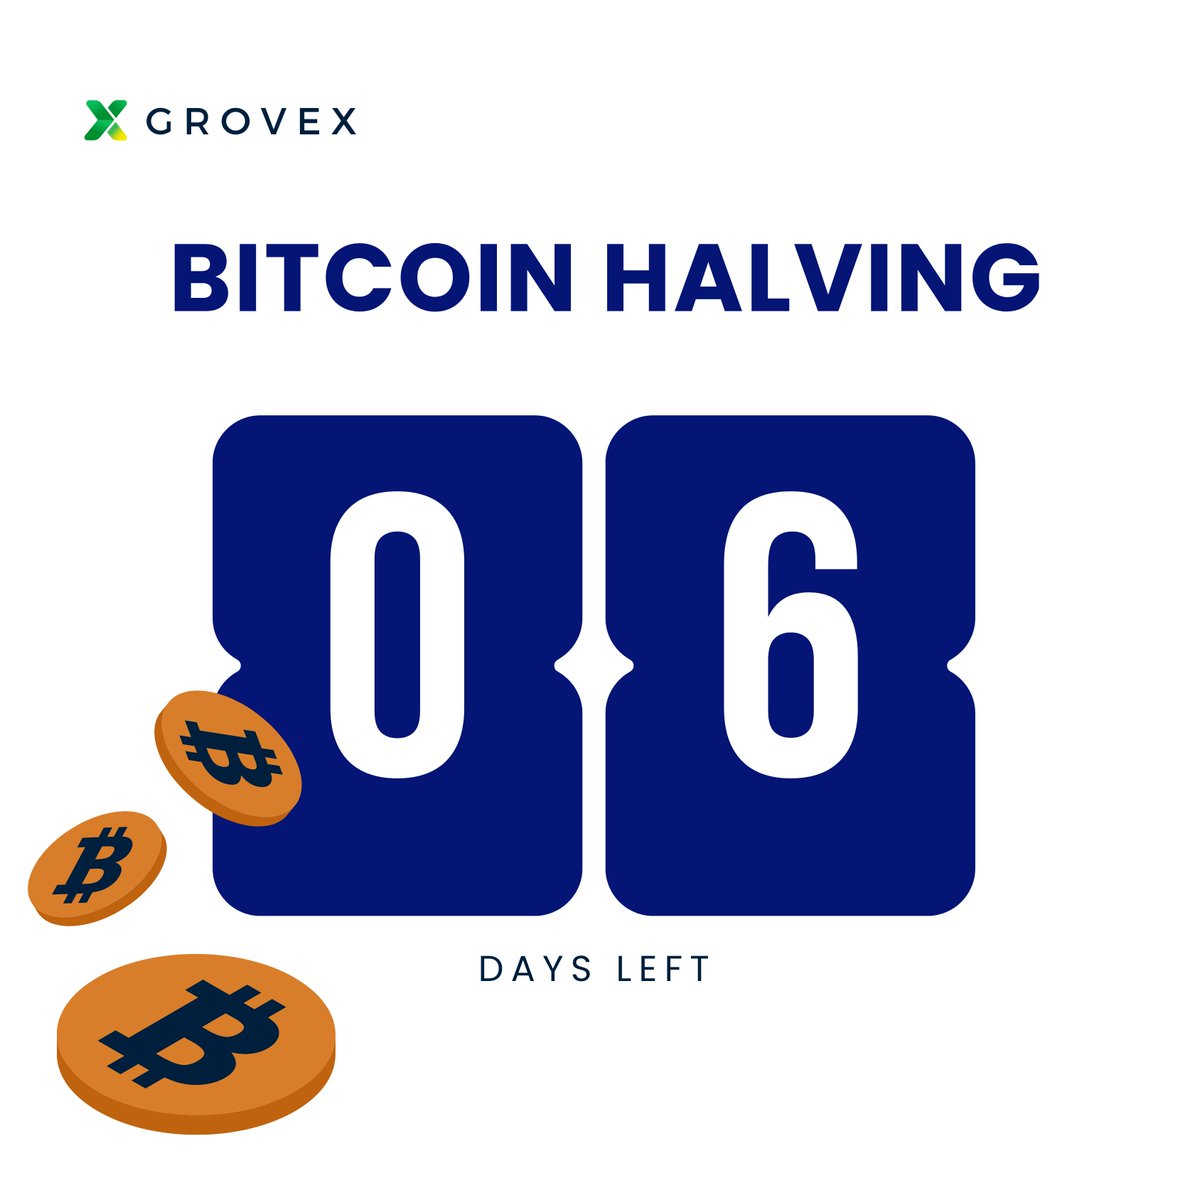 Countdown Alert! ⌛
Only 6 days left until the #BitcoinHalving! #cryptocurrency #GroveX